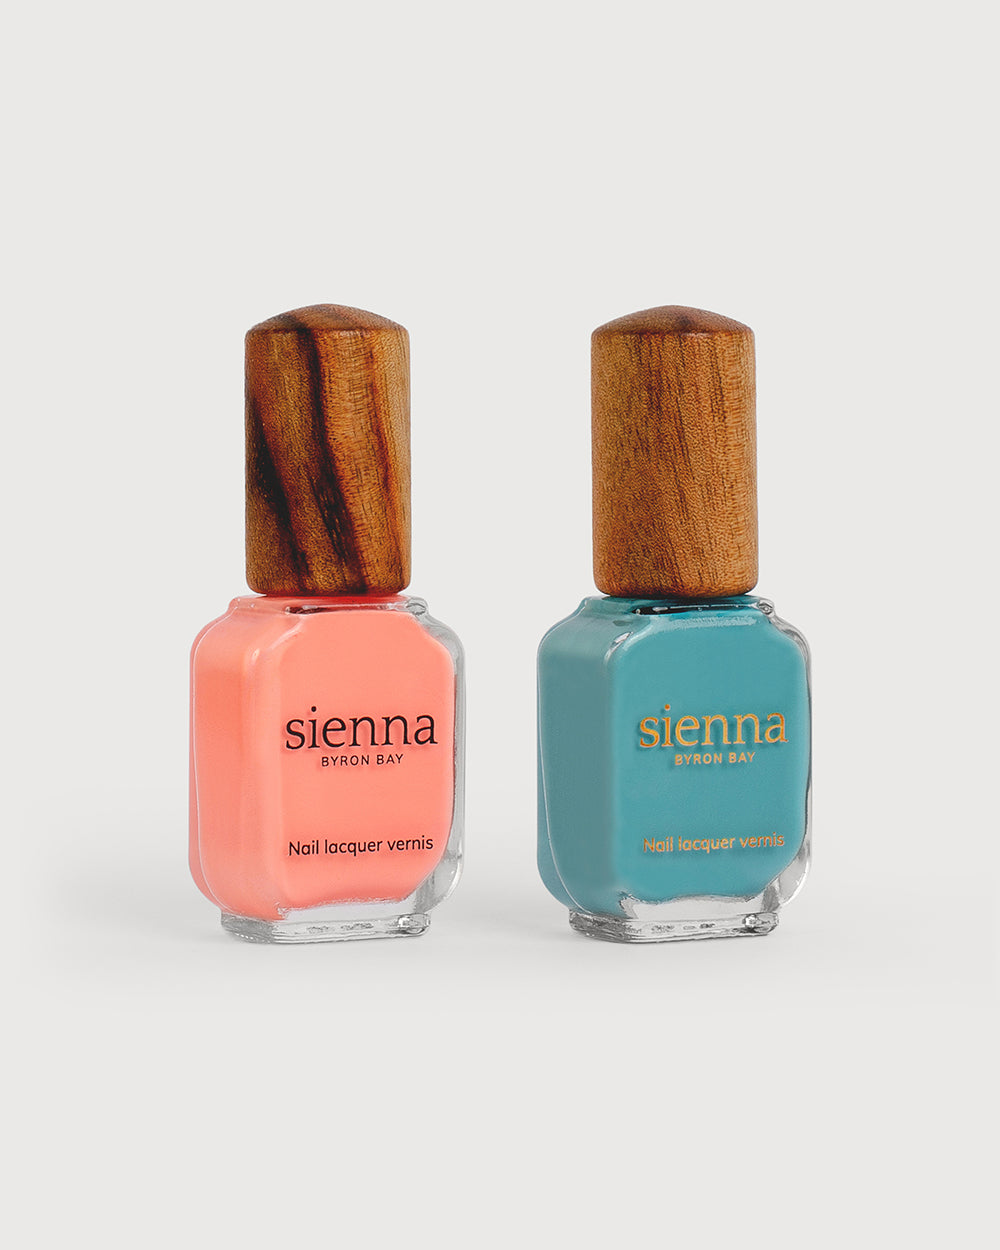 Vibrant peach and Turquoise aqua nail polish glass bottles with timber cap